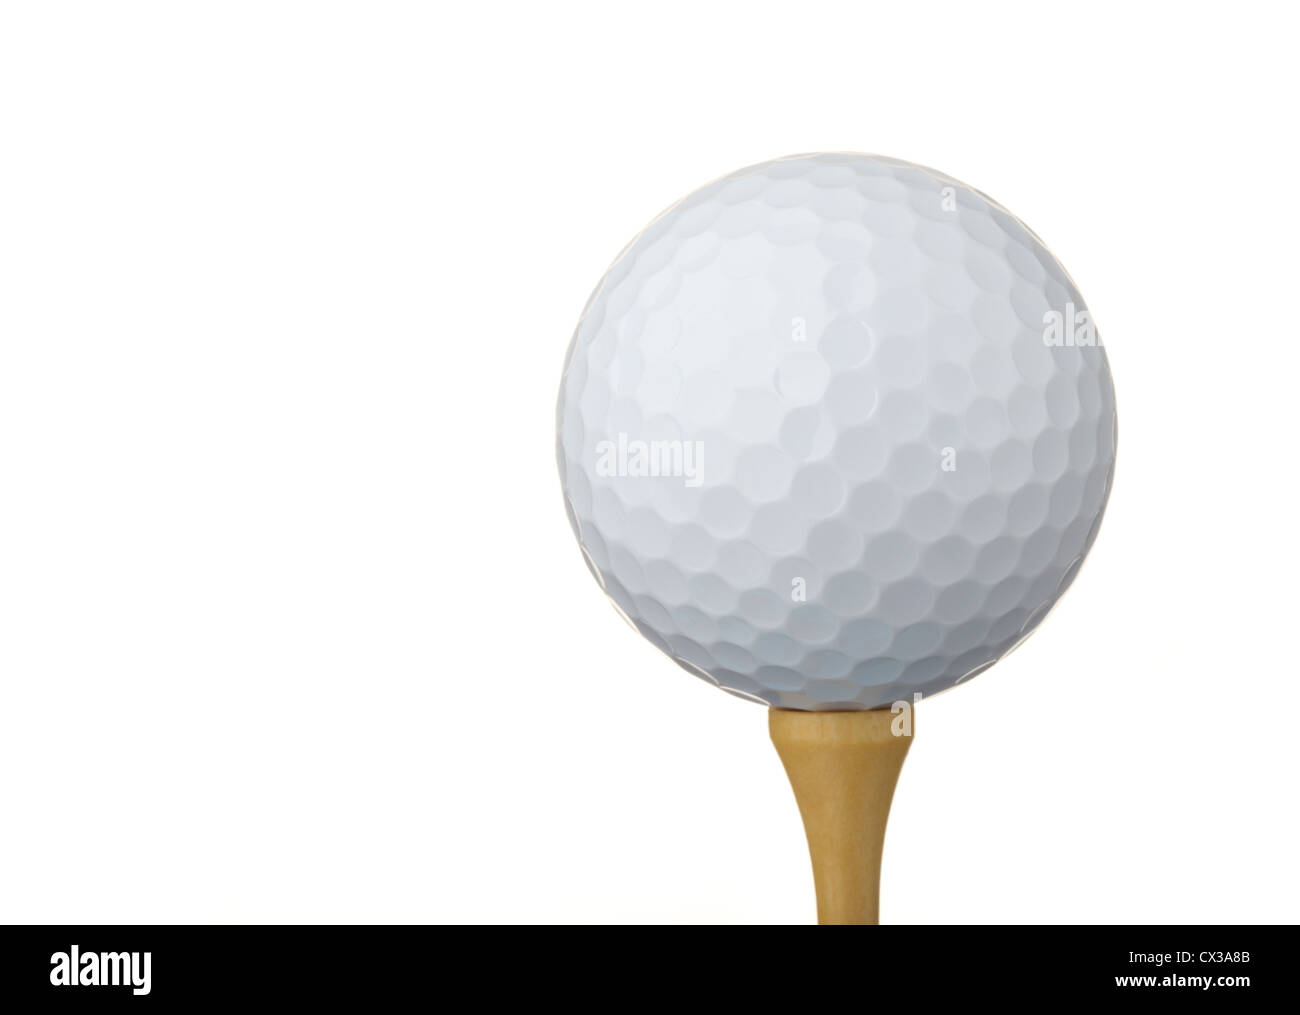 Golf ball on a tee, isolated on white Stock Photo